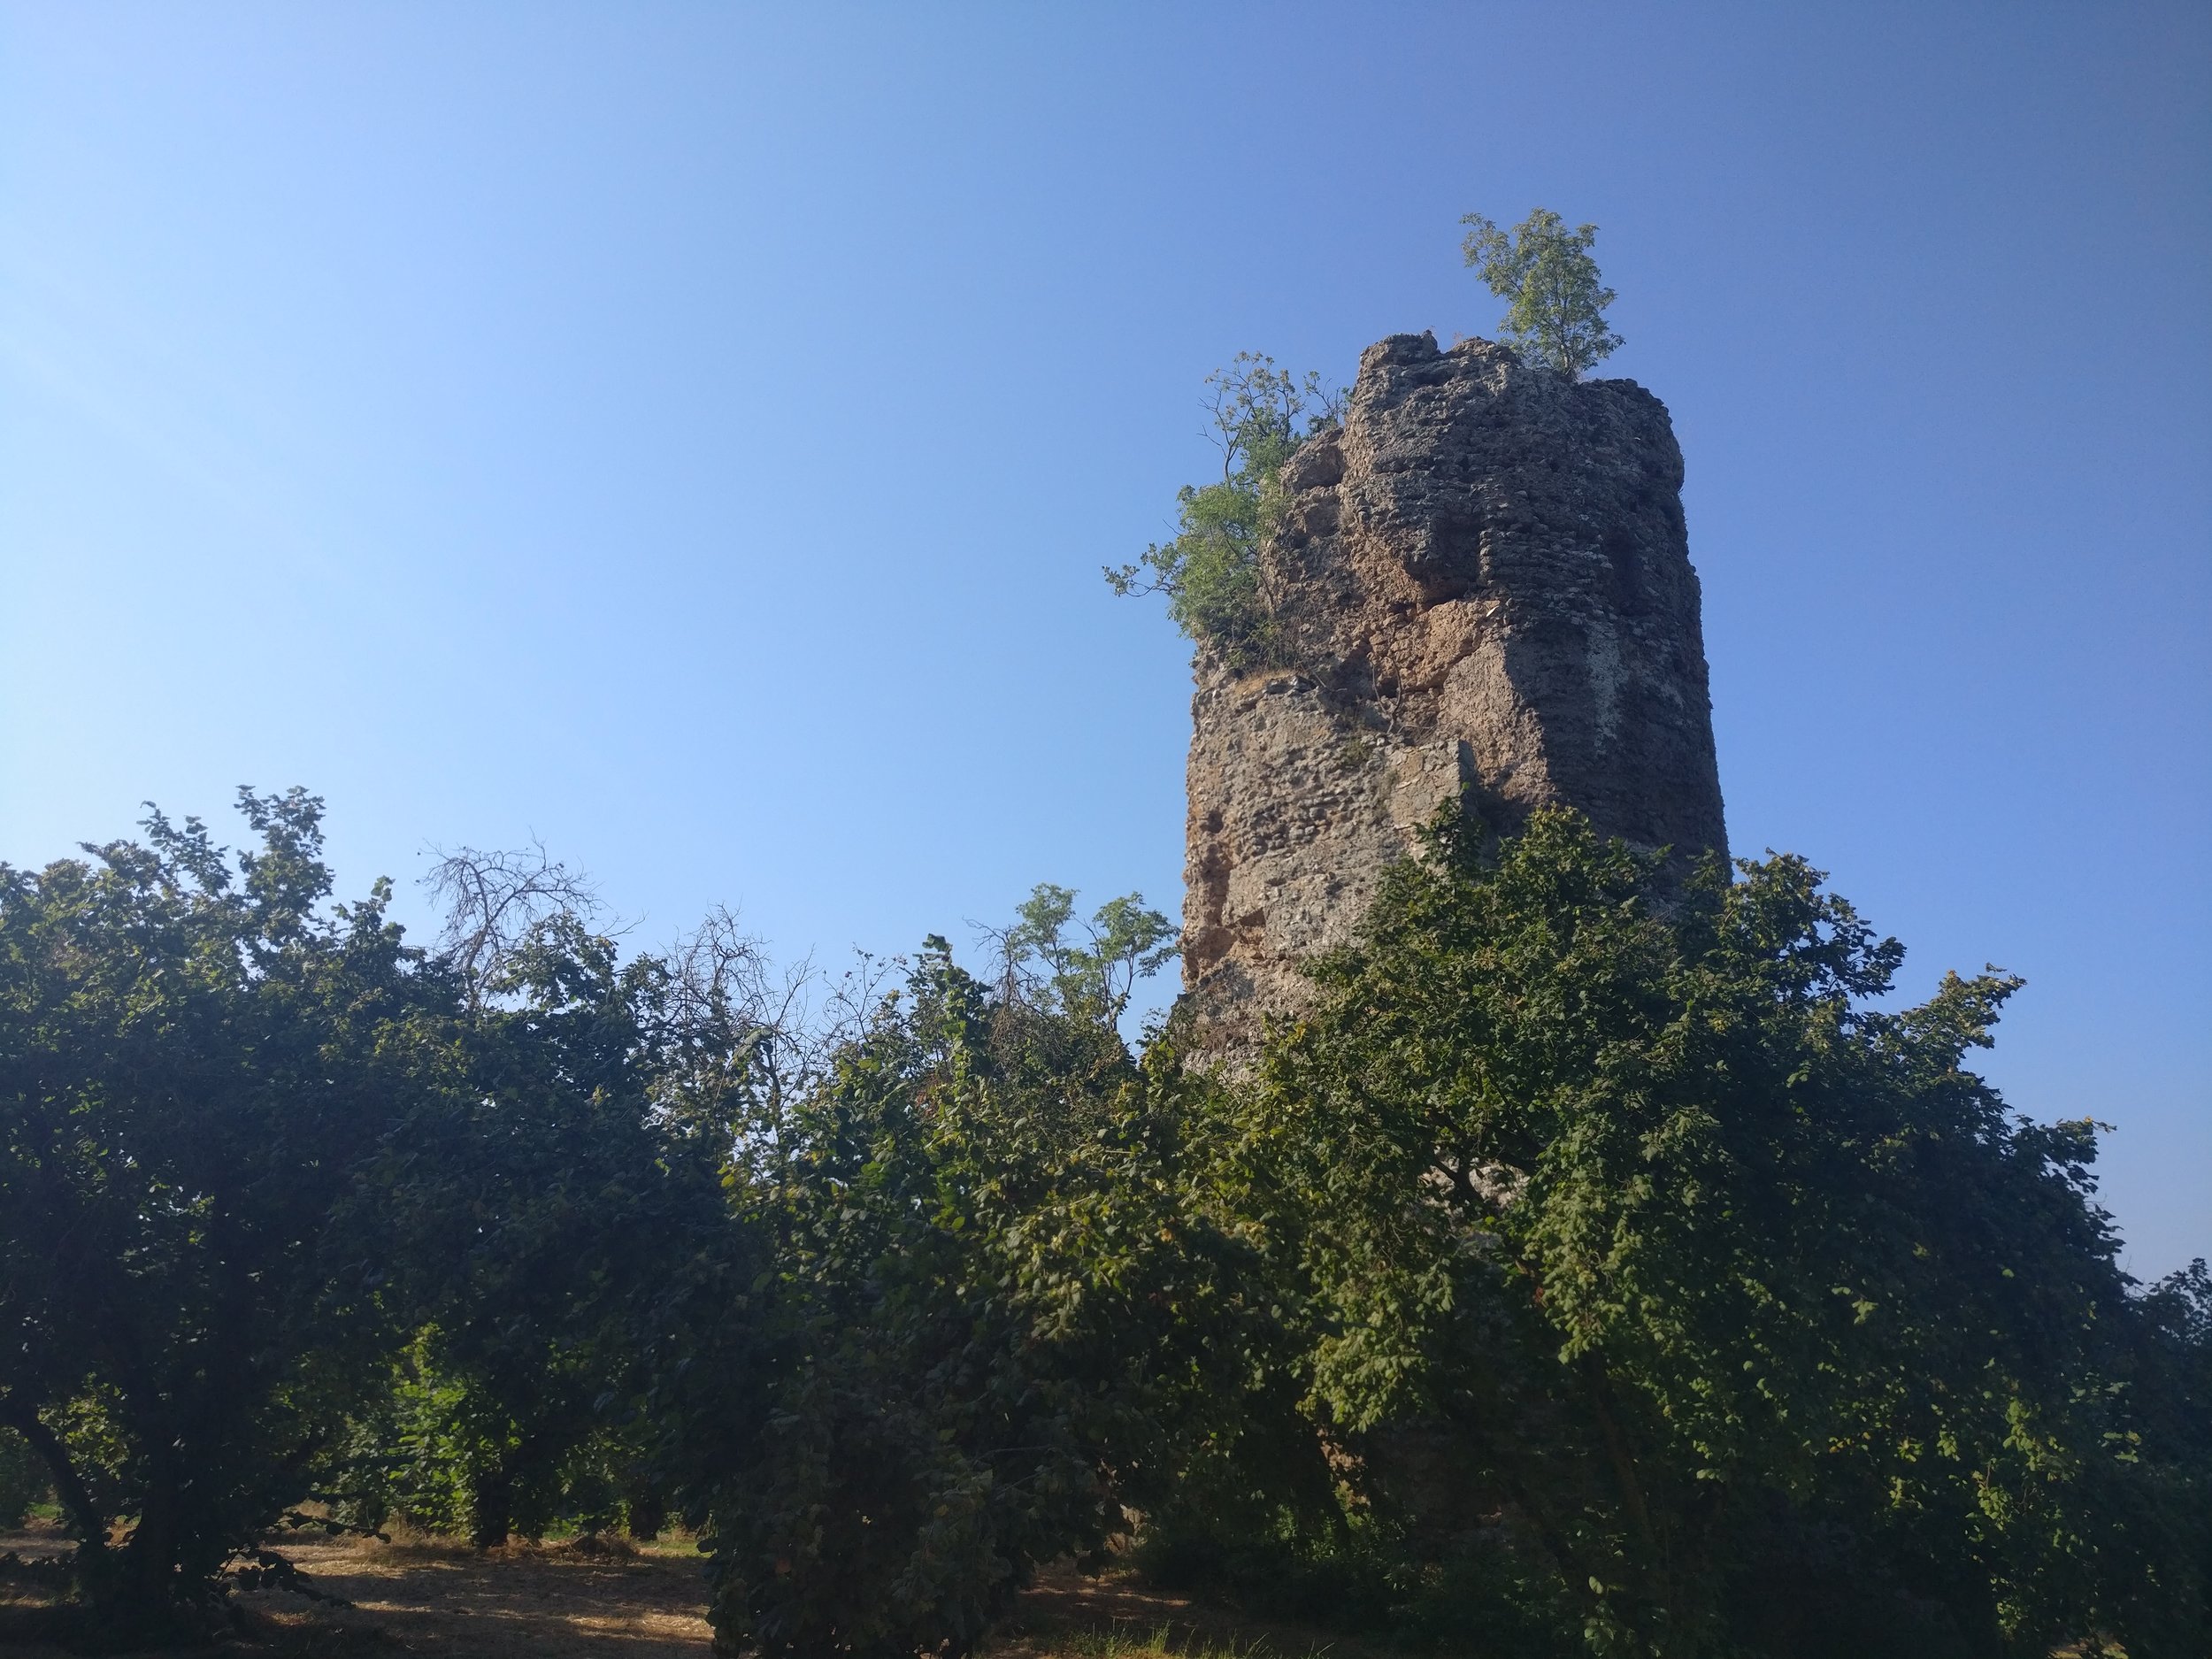  A derelict tower in a hazelnut orchard 